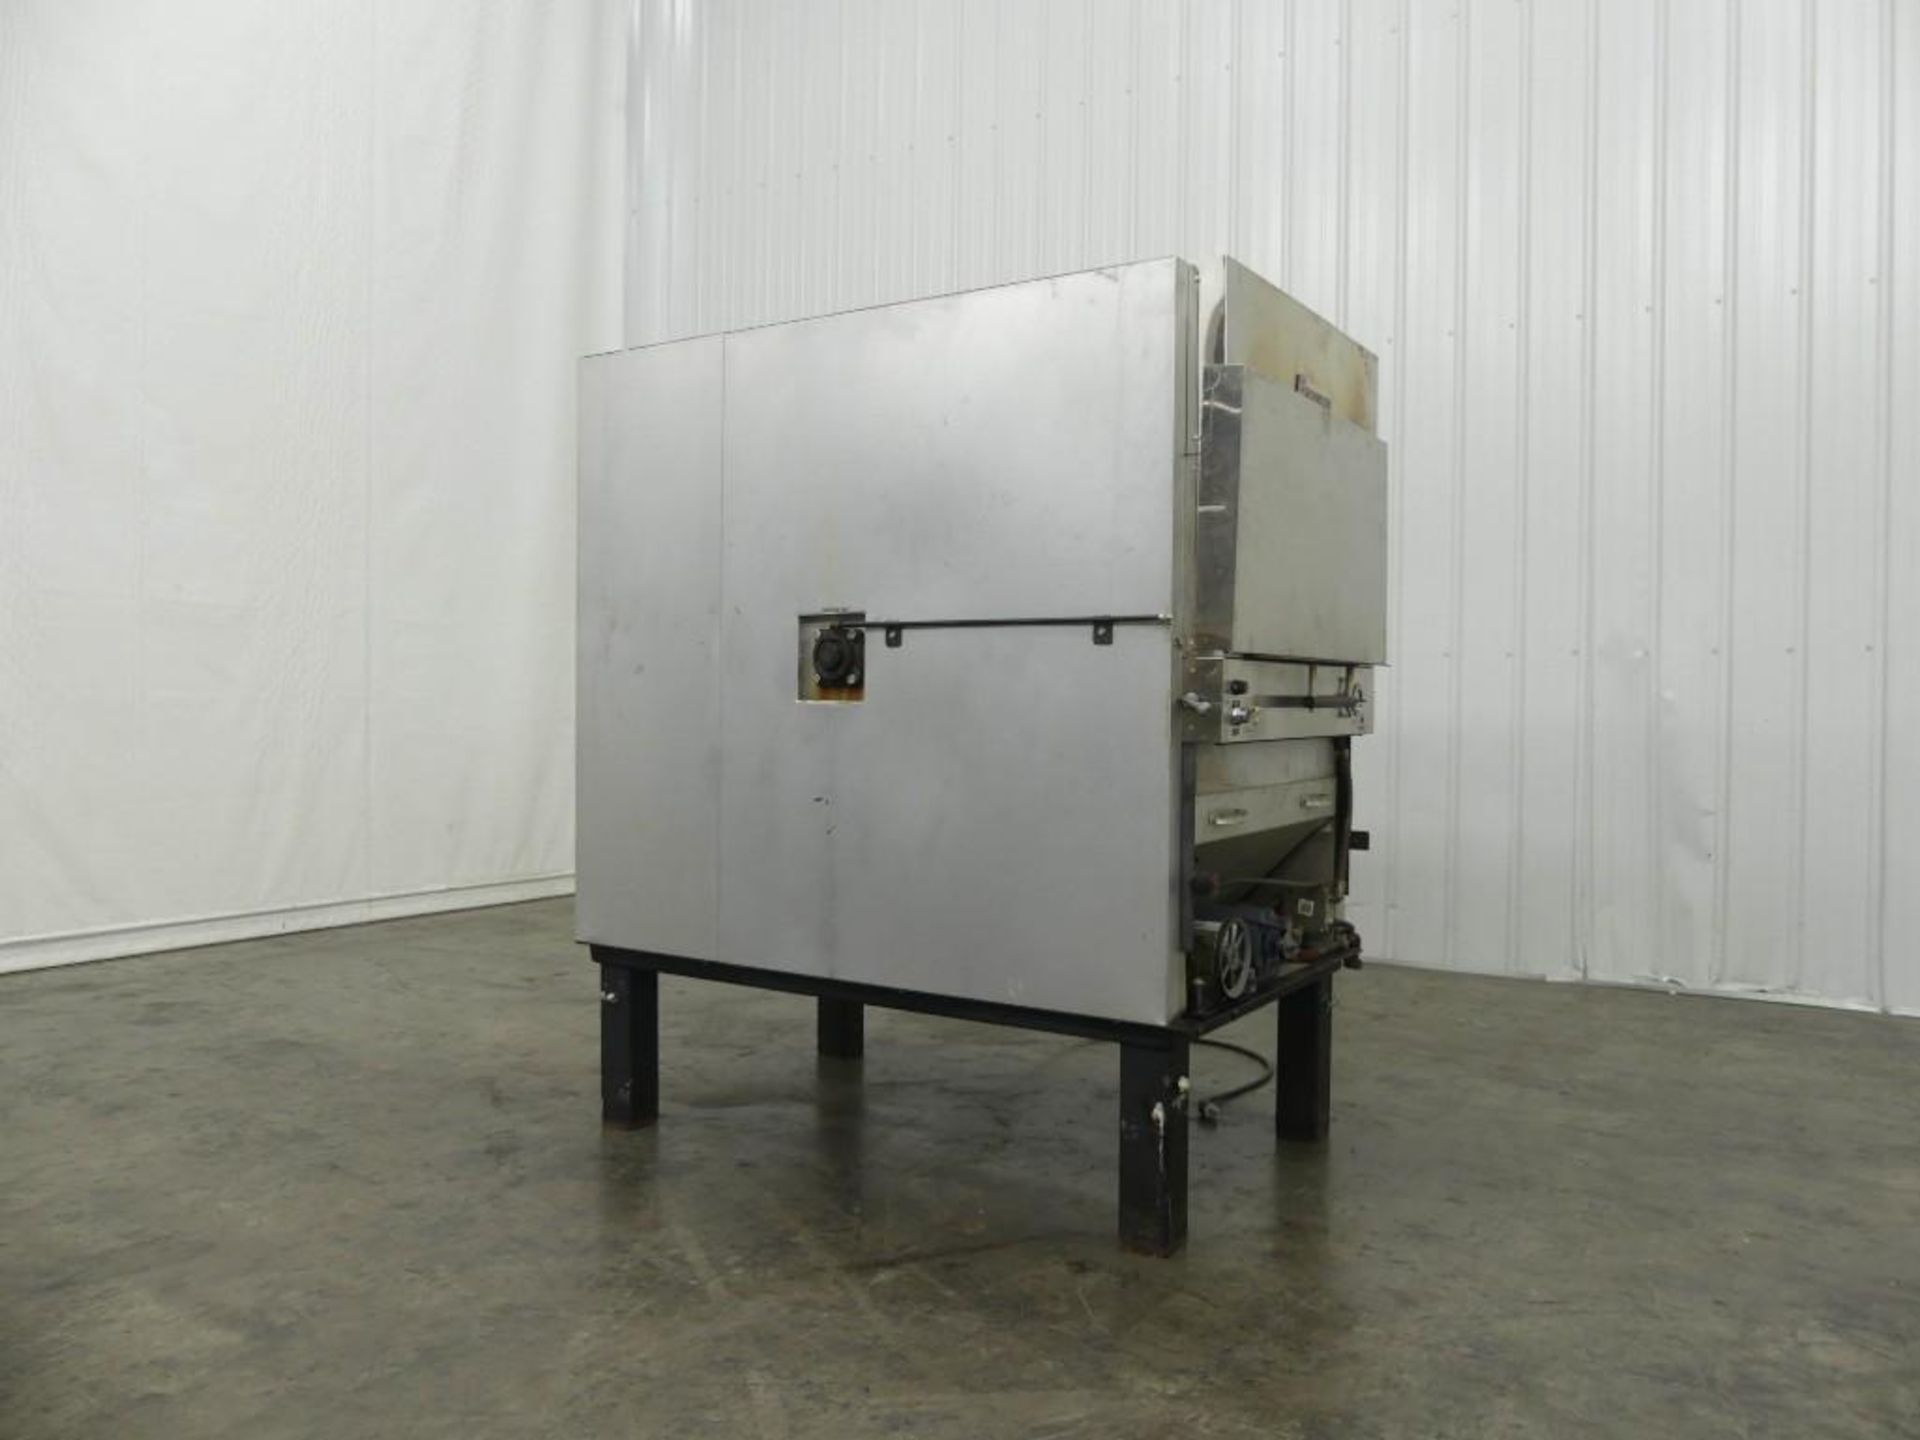 Bolling 500 M 5 Tray Revolving Rack SS Oven - Image 3 of 11